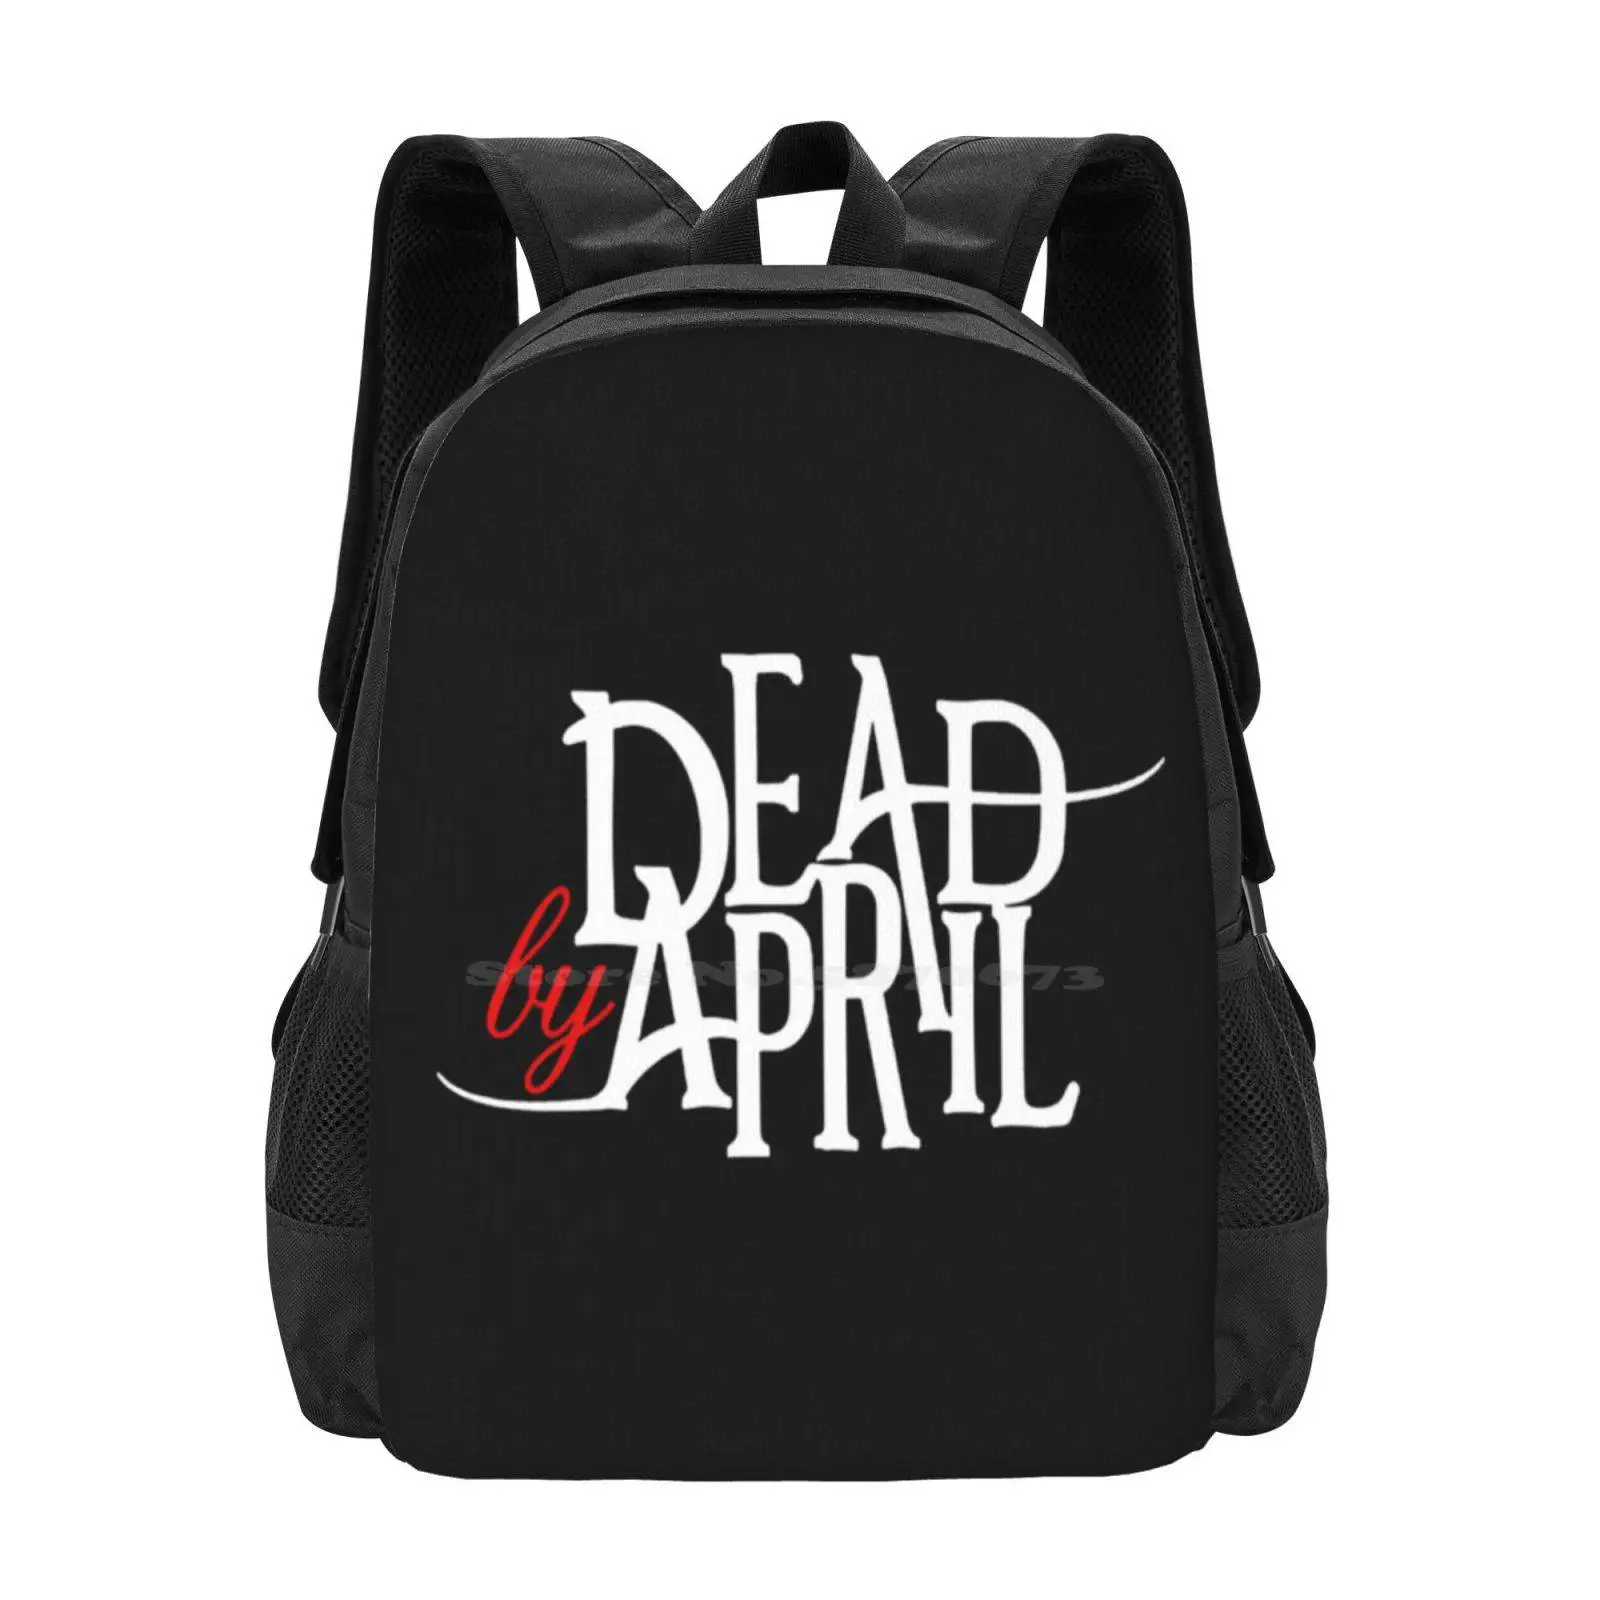 

Dead By April School Bags Travel Laptop Backpack Dead By April Metal Band Underground Drum Guitar